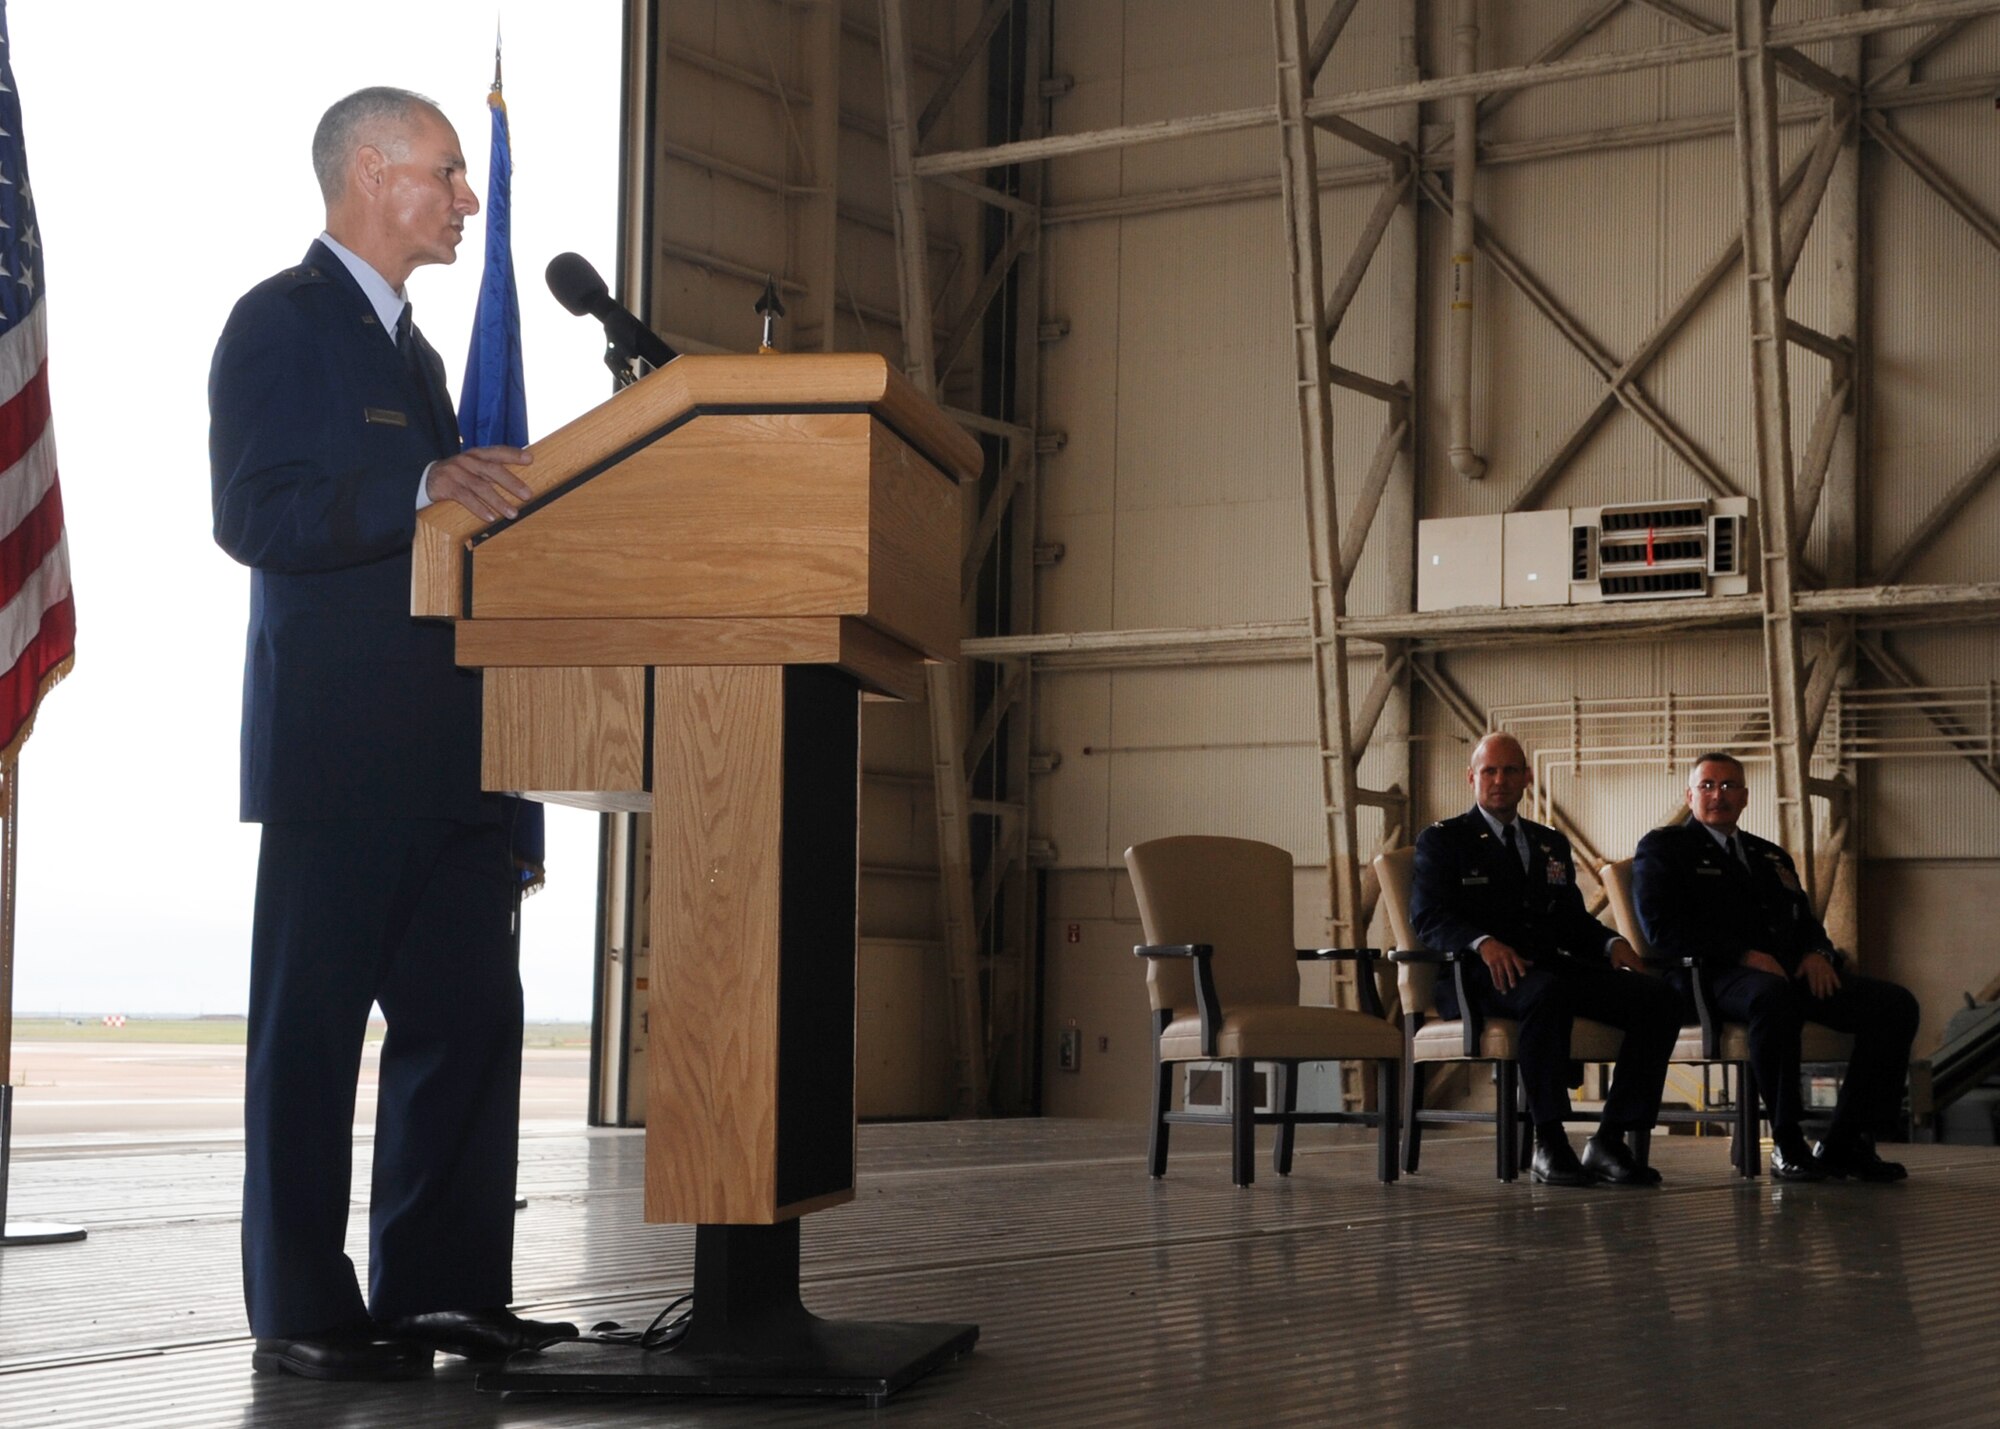 ALTUS AIR FORCE BASE, Okla. – Brig. Gen. Udo K. “Karl” McGregor, commander of the 452nd Air Mobility Wing, March Air Reserve Base, Calif., speaks about the 730th Air Mobility Training Squadron during its reactivation and assumption of command at hangar 517 June 13, 2012. The 730th AMTS falls under the 452nd Air Mobility Wing at March ARB and is part of the Air Force Reserve Command. (U.S. Air Force photo by Airman 1st Class Franklin R. Ramos / 97th Air Mobility Wing / Released)